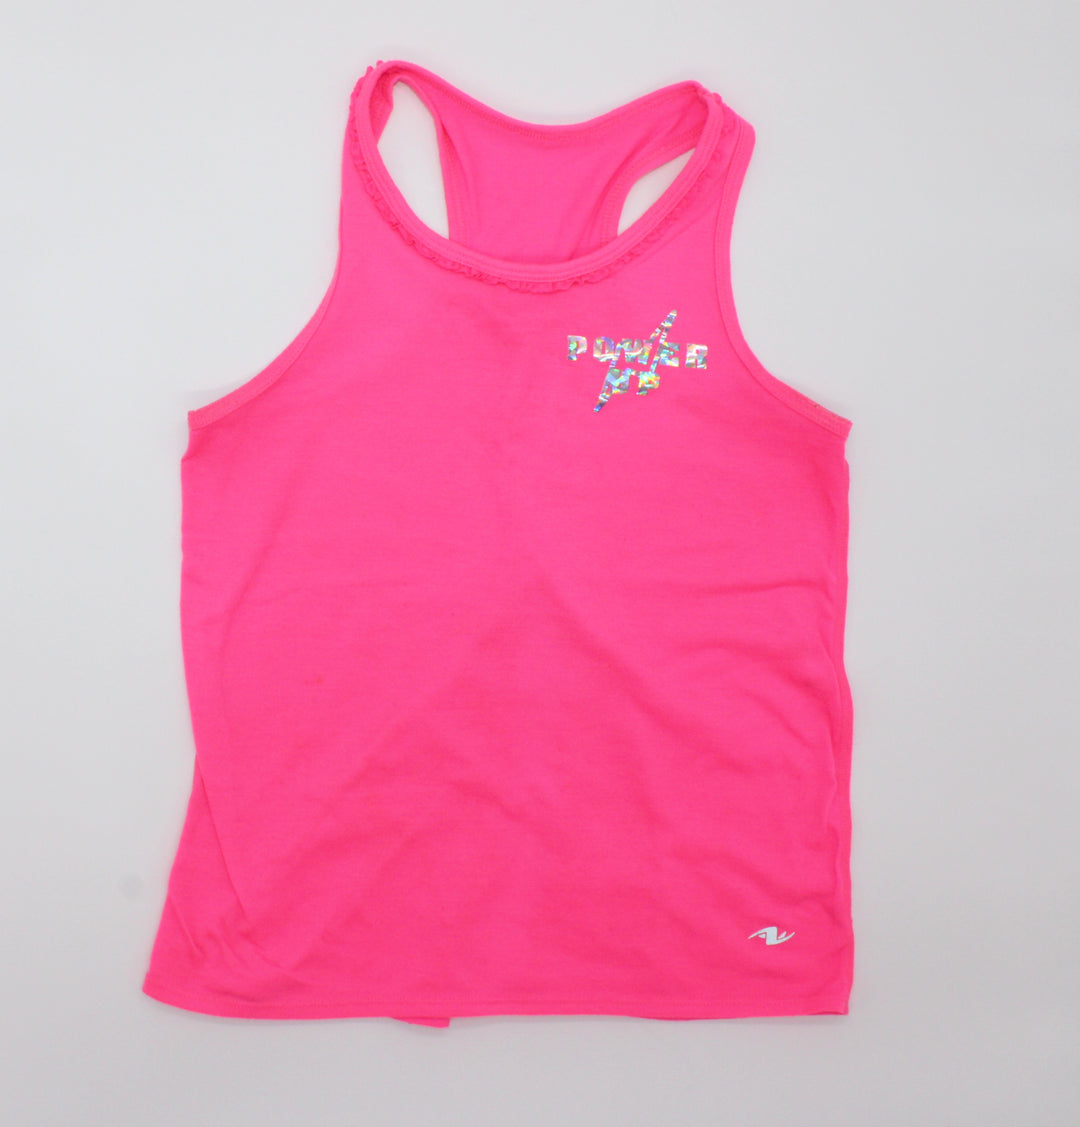 Athletic Works Pink Power Up Tank Top with Open Back 10-12Y EUC